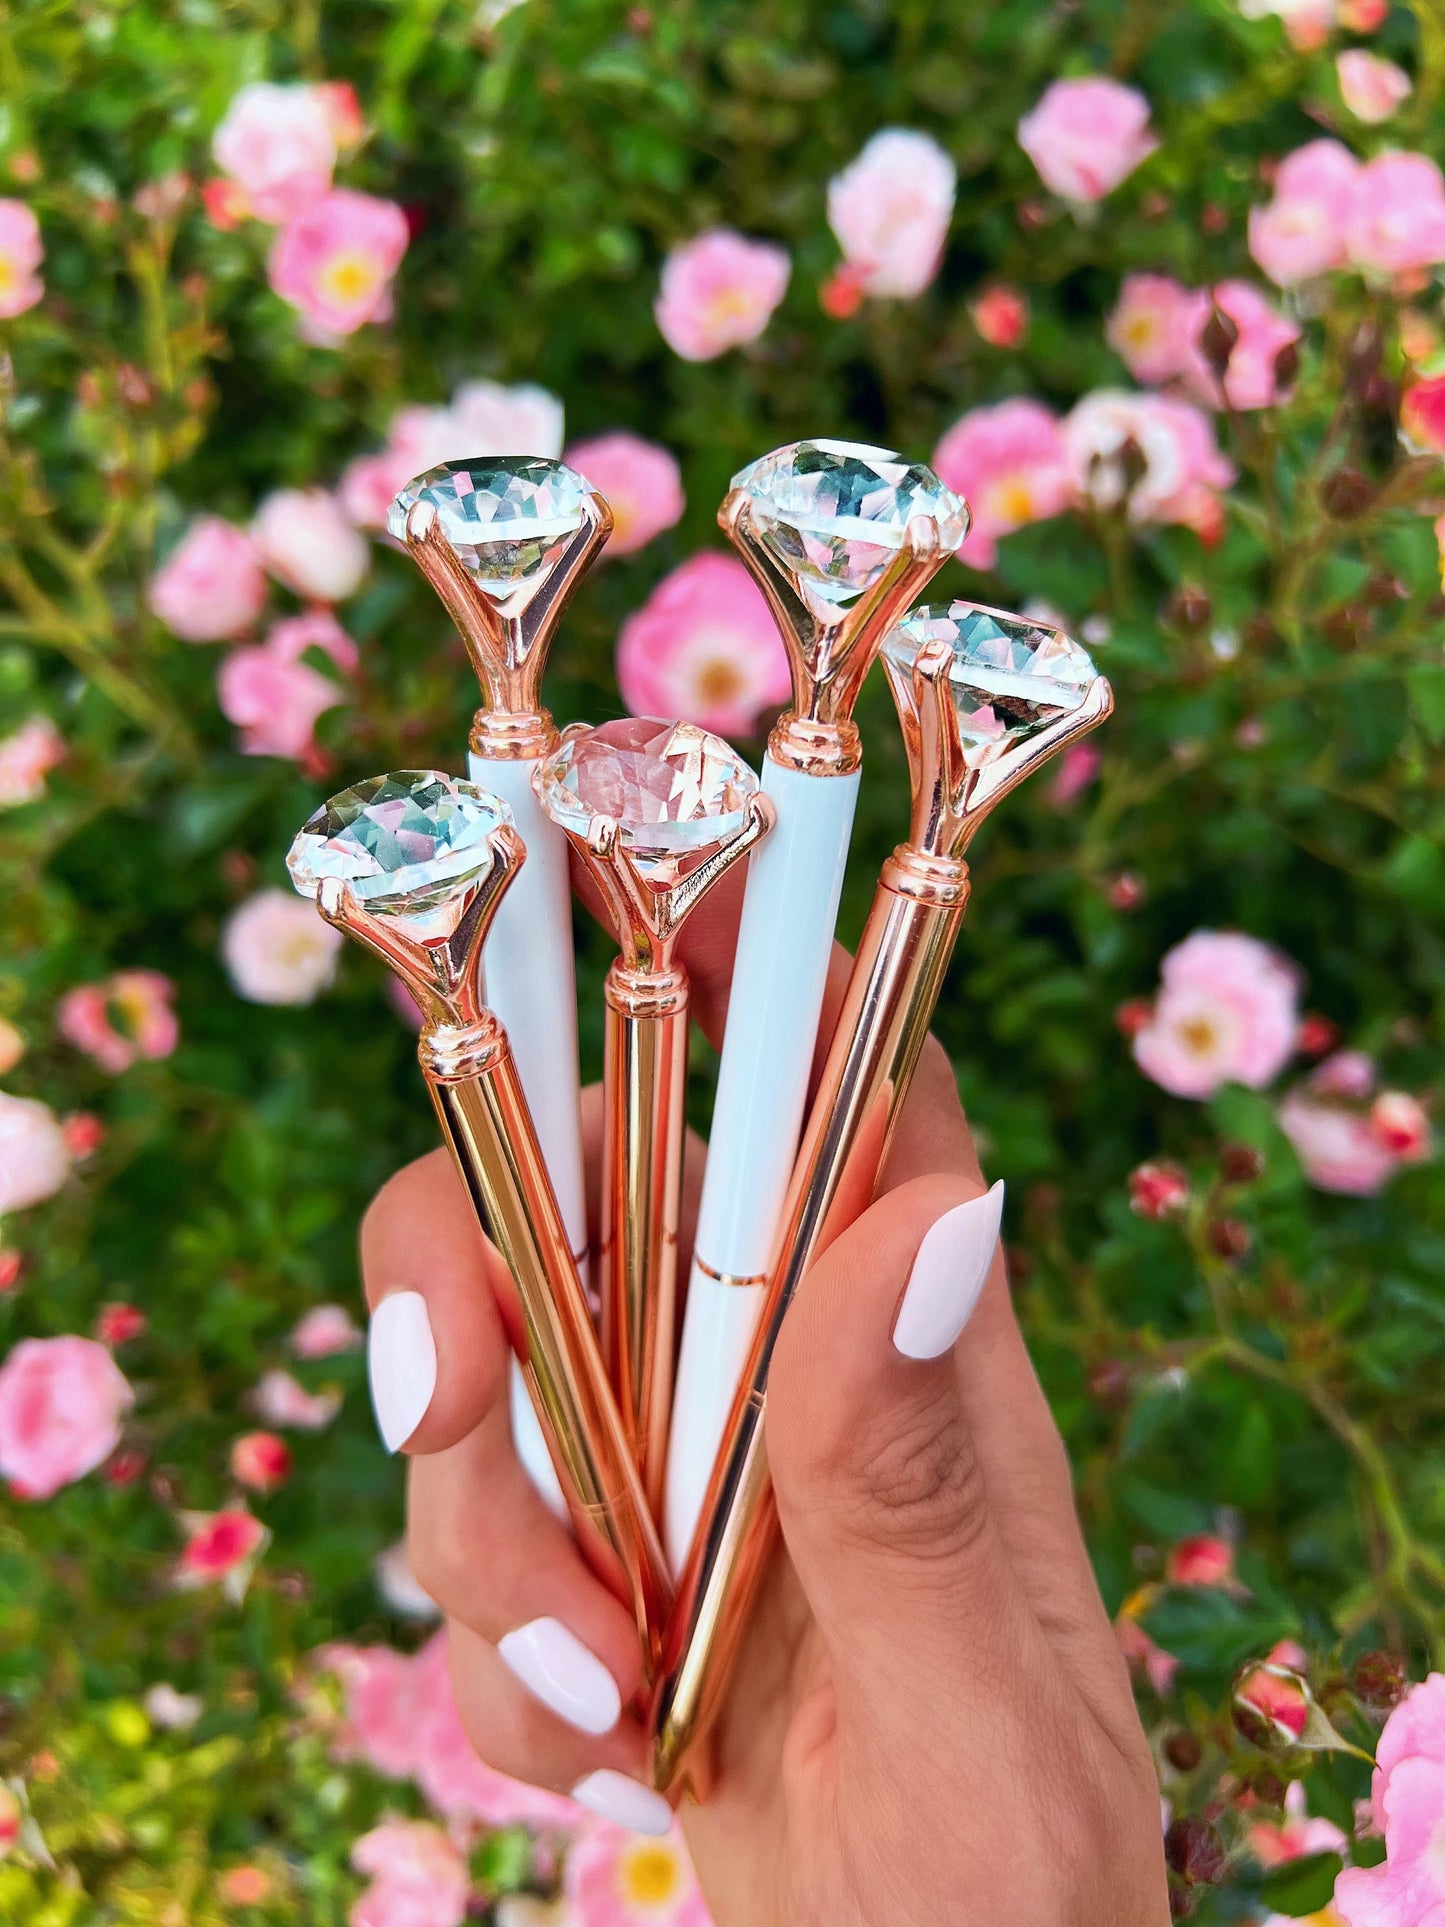 Silver diamond pens - bridesmaid proposal gift | bridesmaid gifts | bachelorette party favors | bridal shower gift | gifts for her